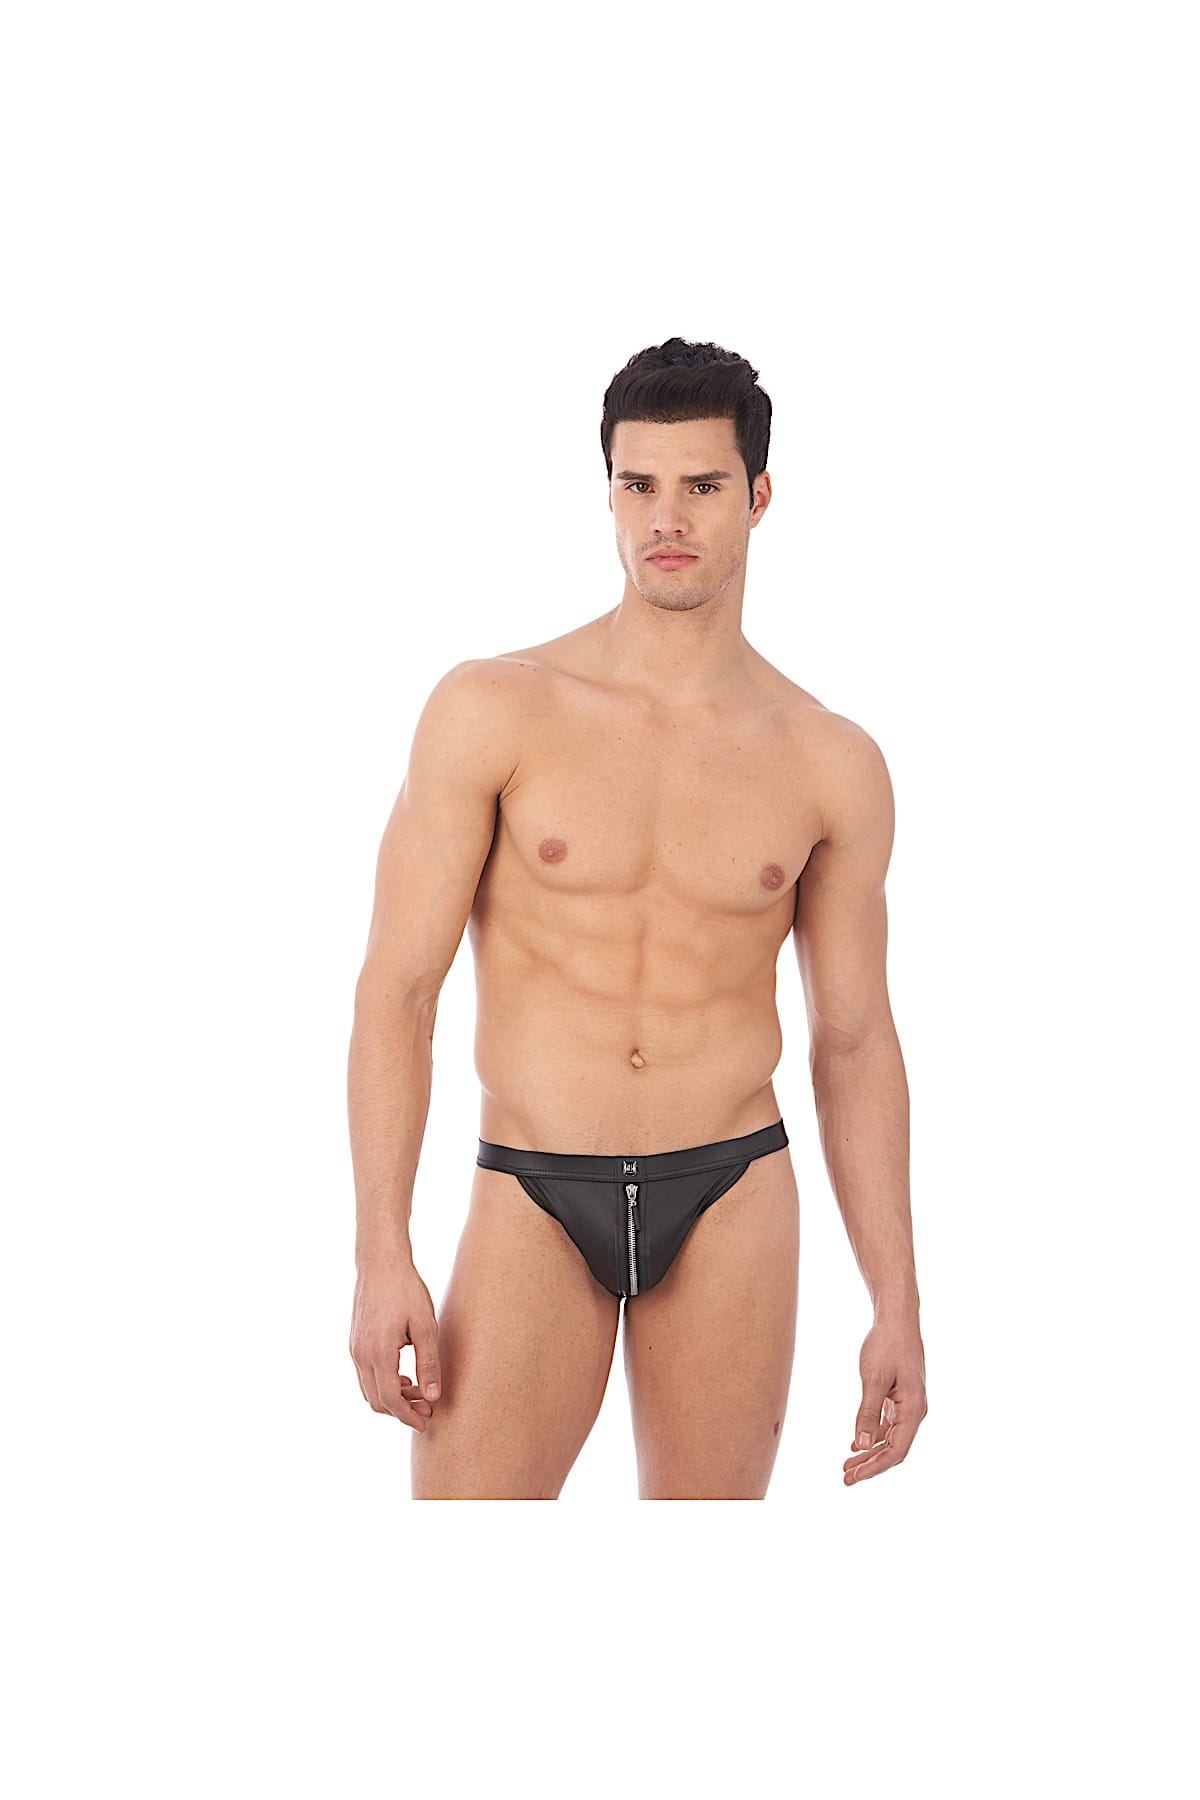 Gregg Homme Red/Black Reckless Zipper Leather-Look Thong